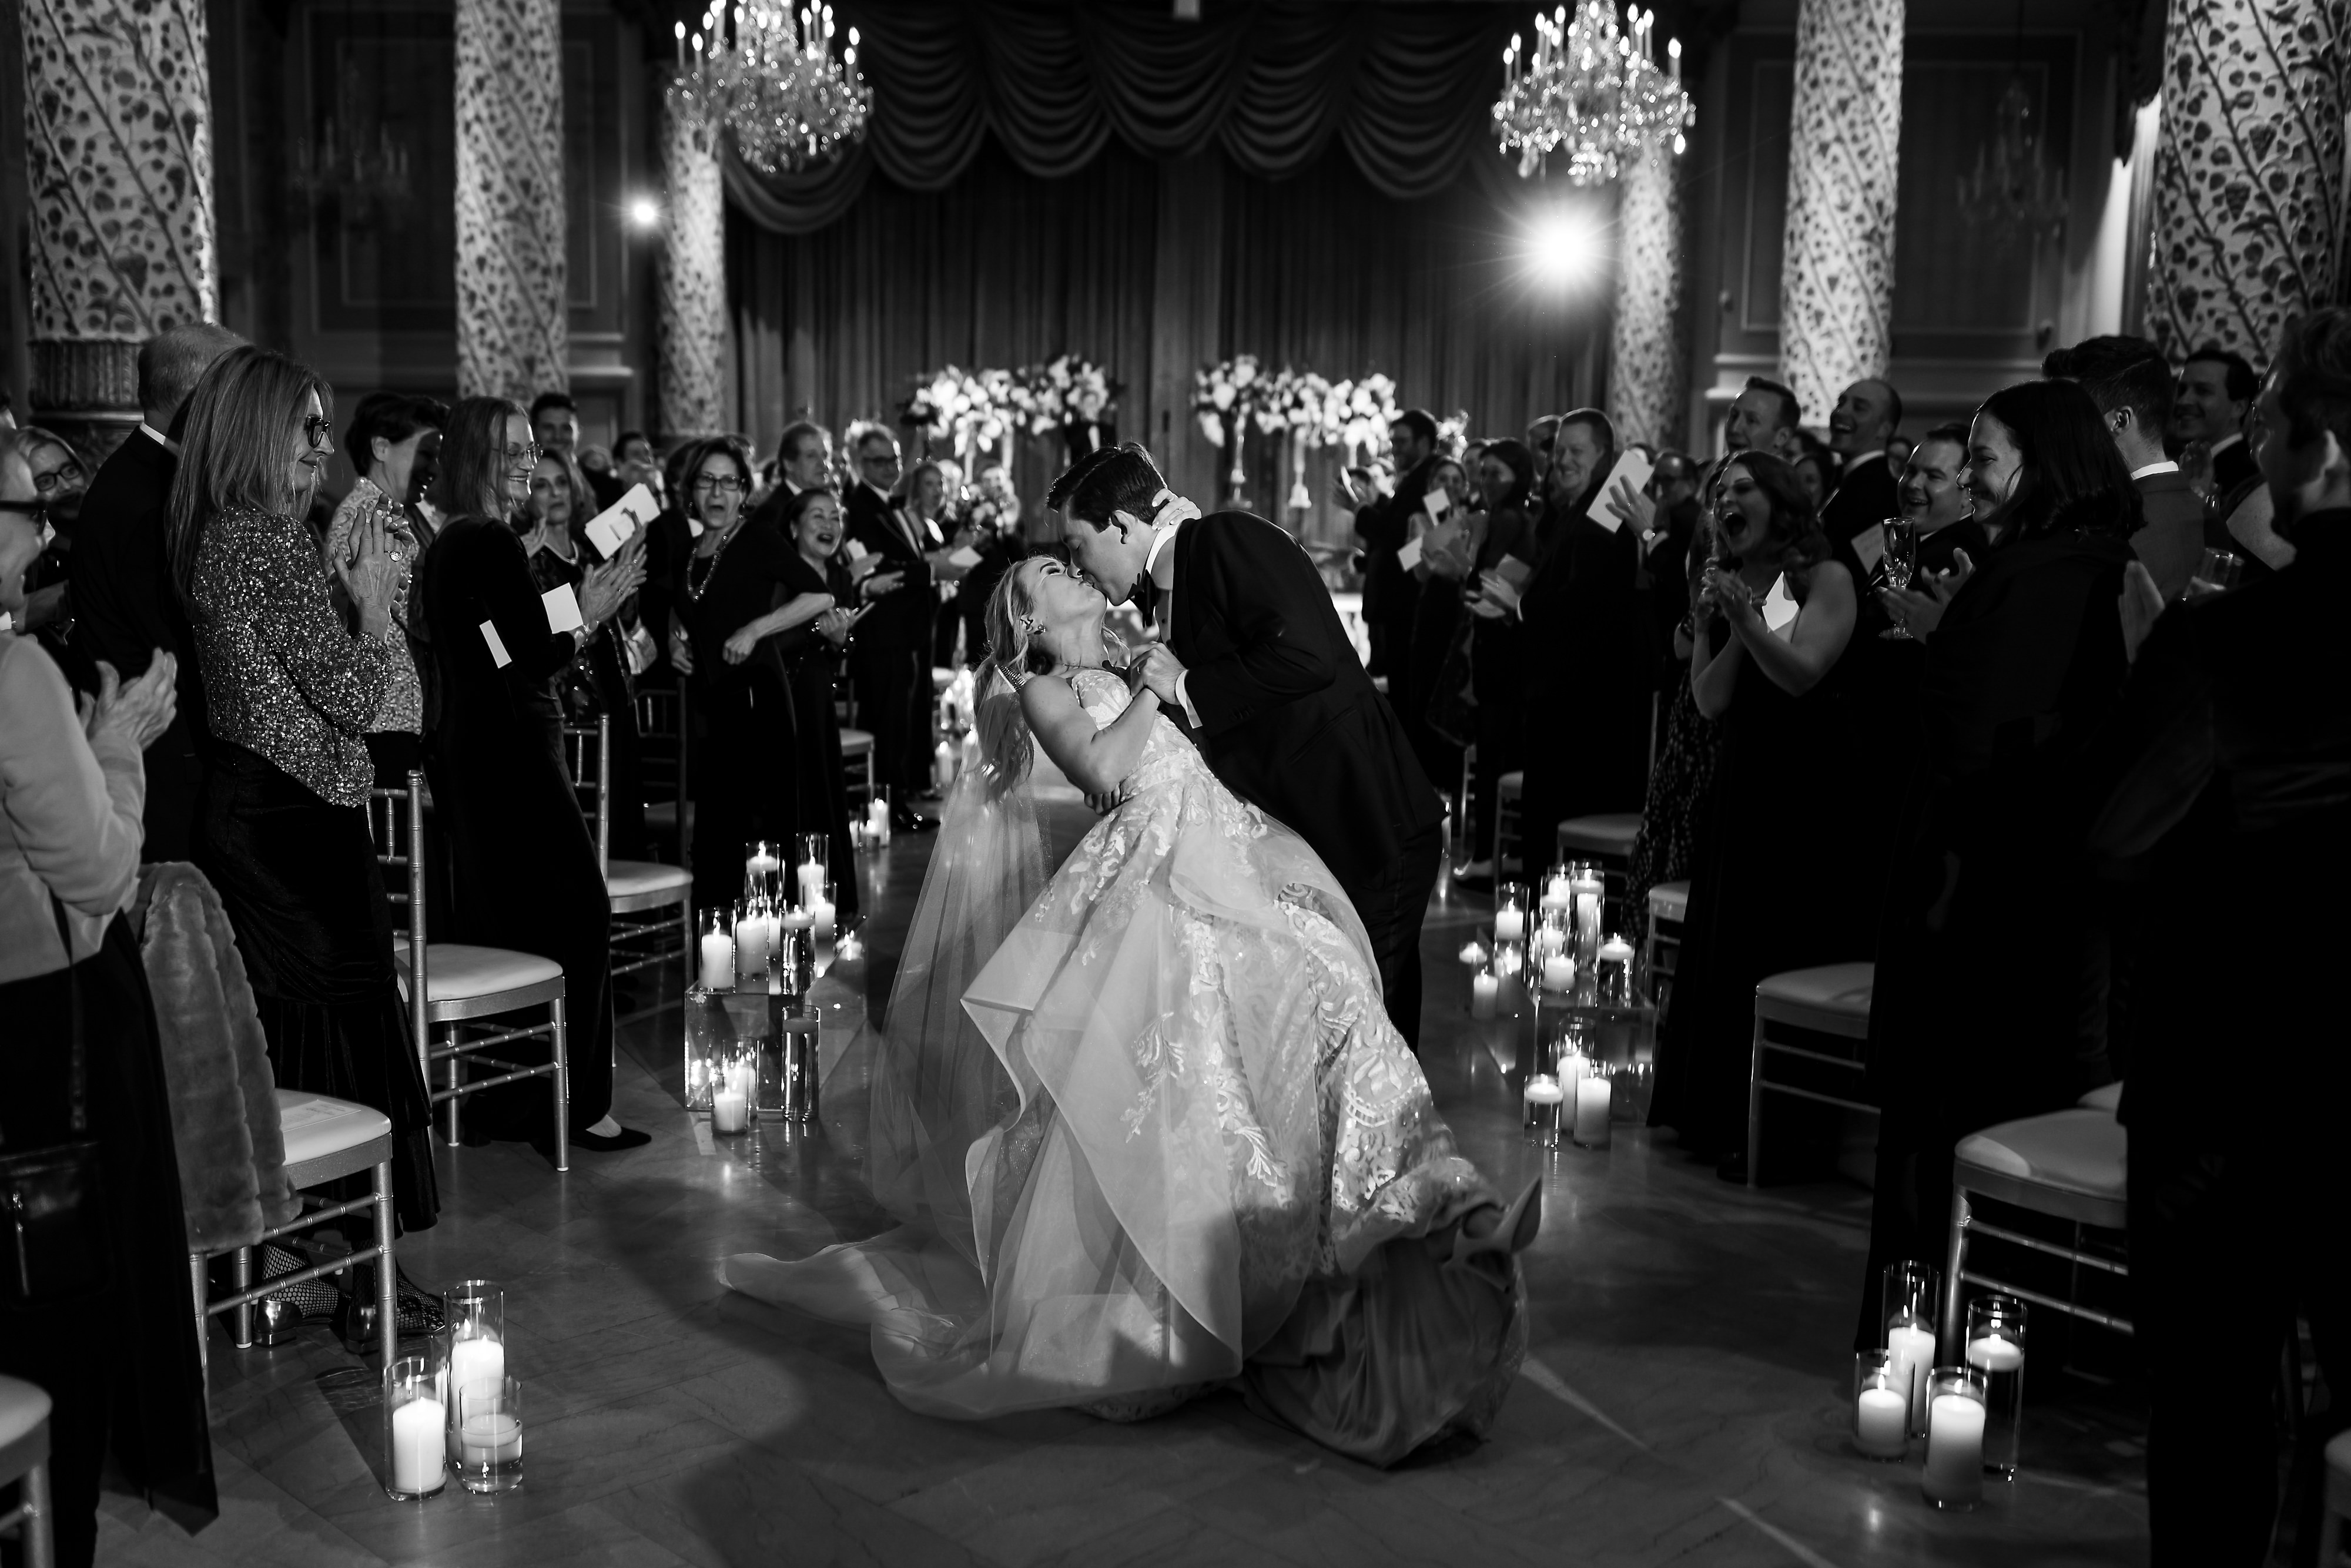 Bride and Groom kiss while walking down the aisle after wedding ceremony in the Grand Ballroom at The Drake Hotel in Chicago